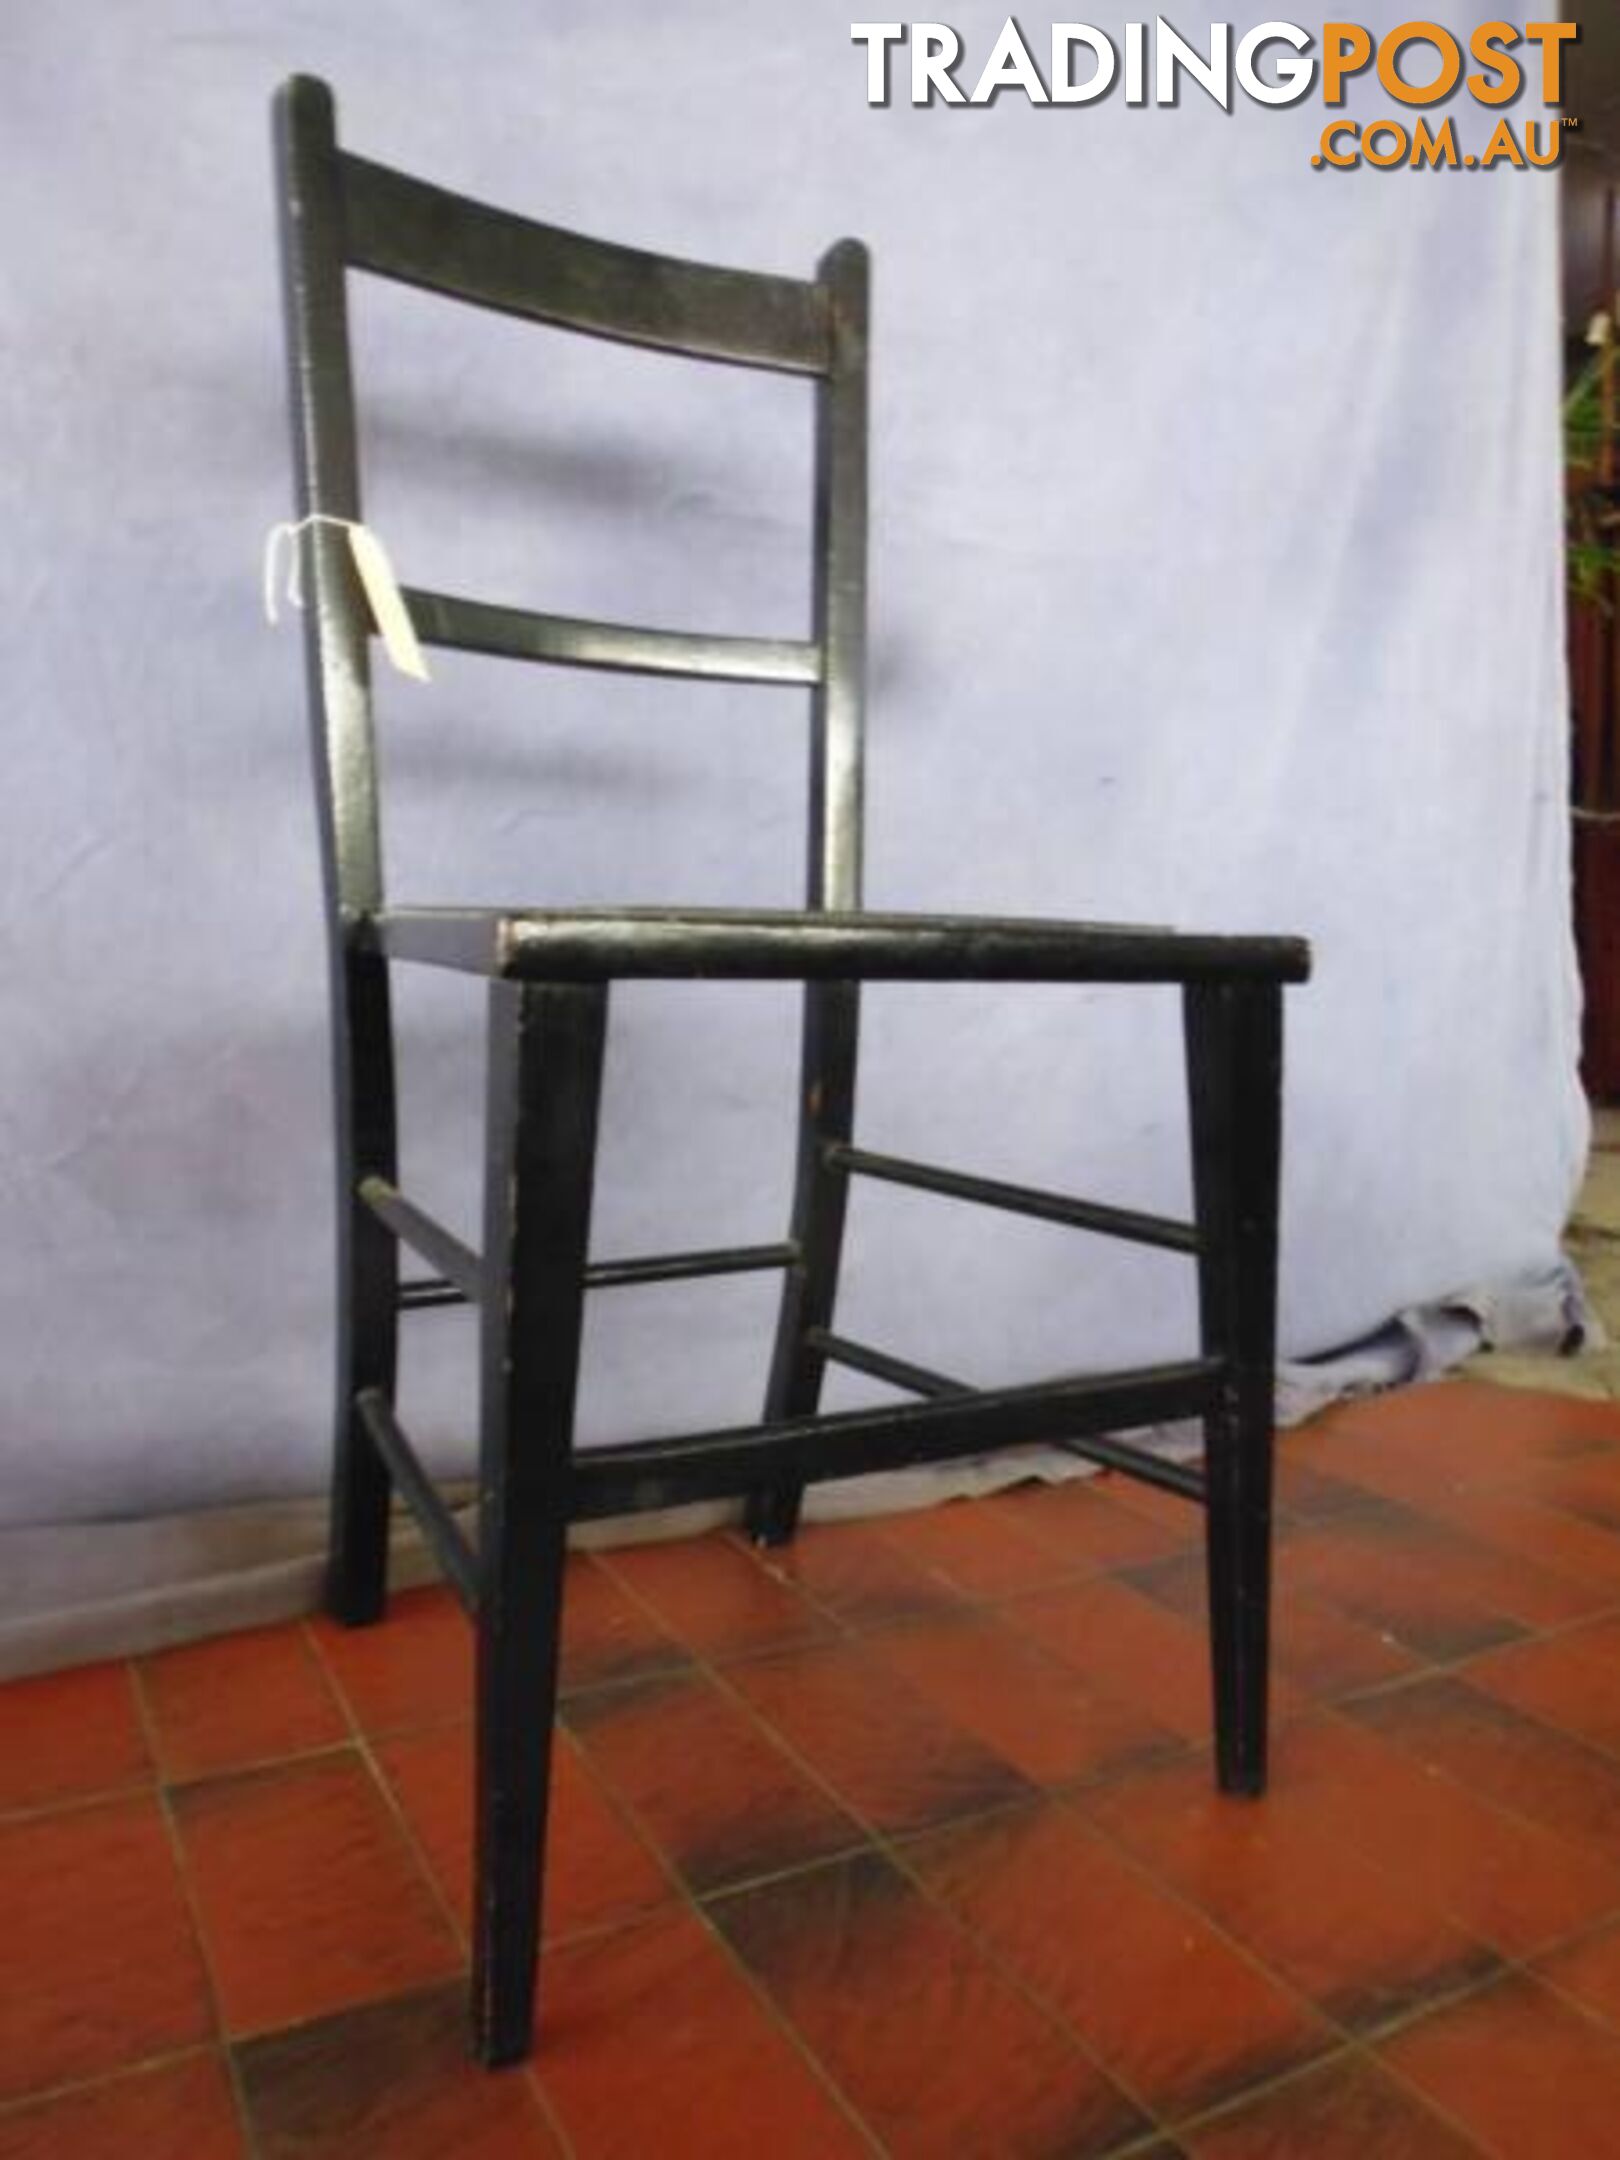 Chair, Black, Spindle Back, 359393